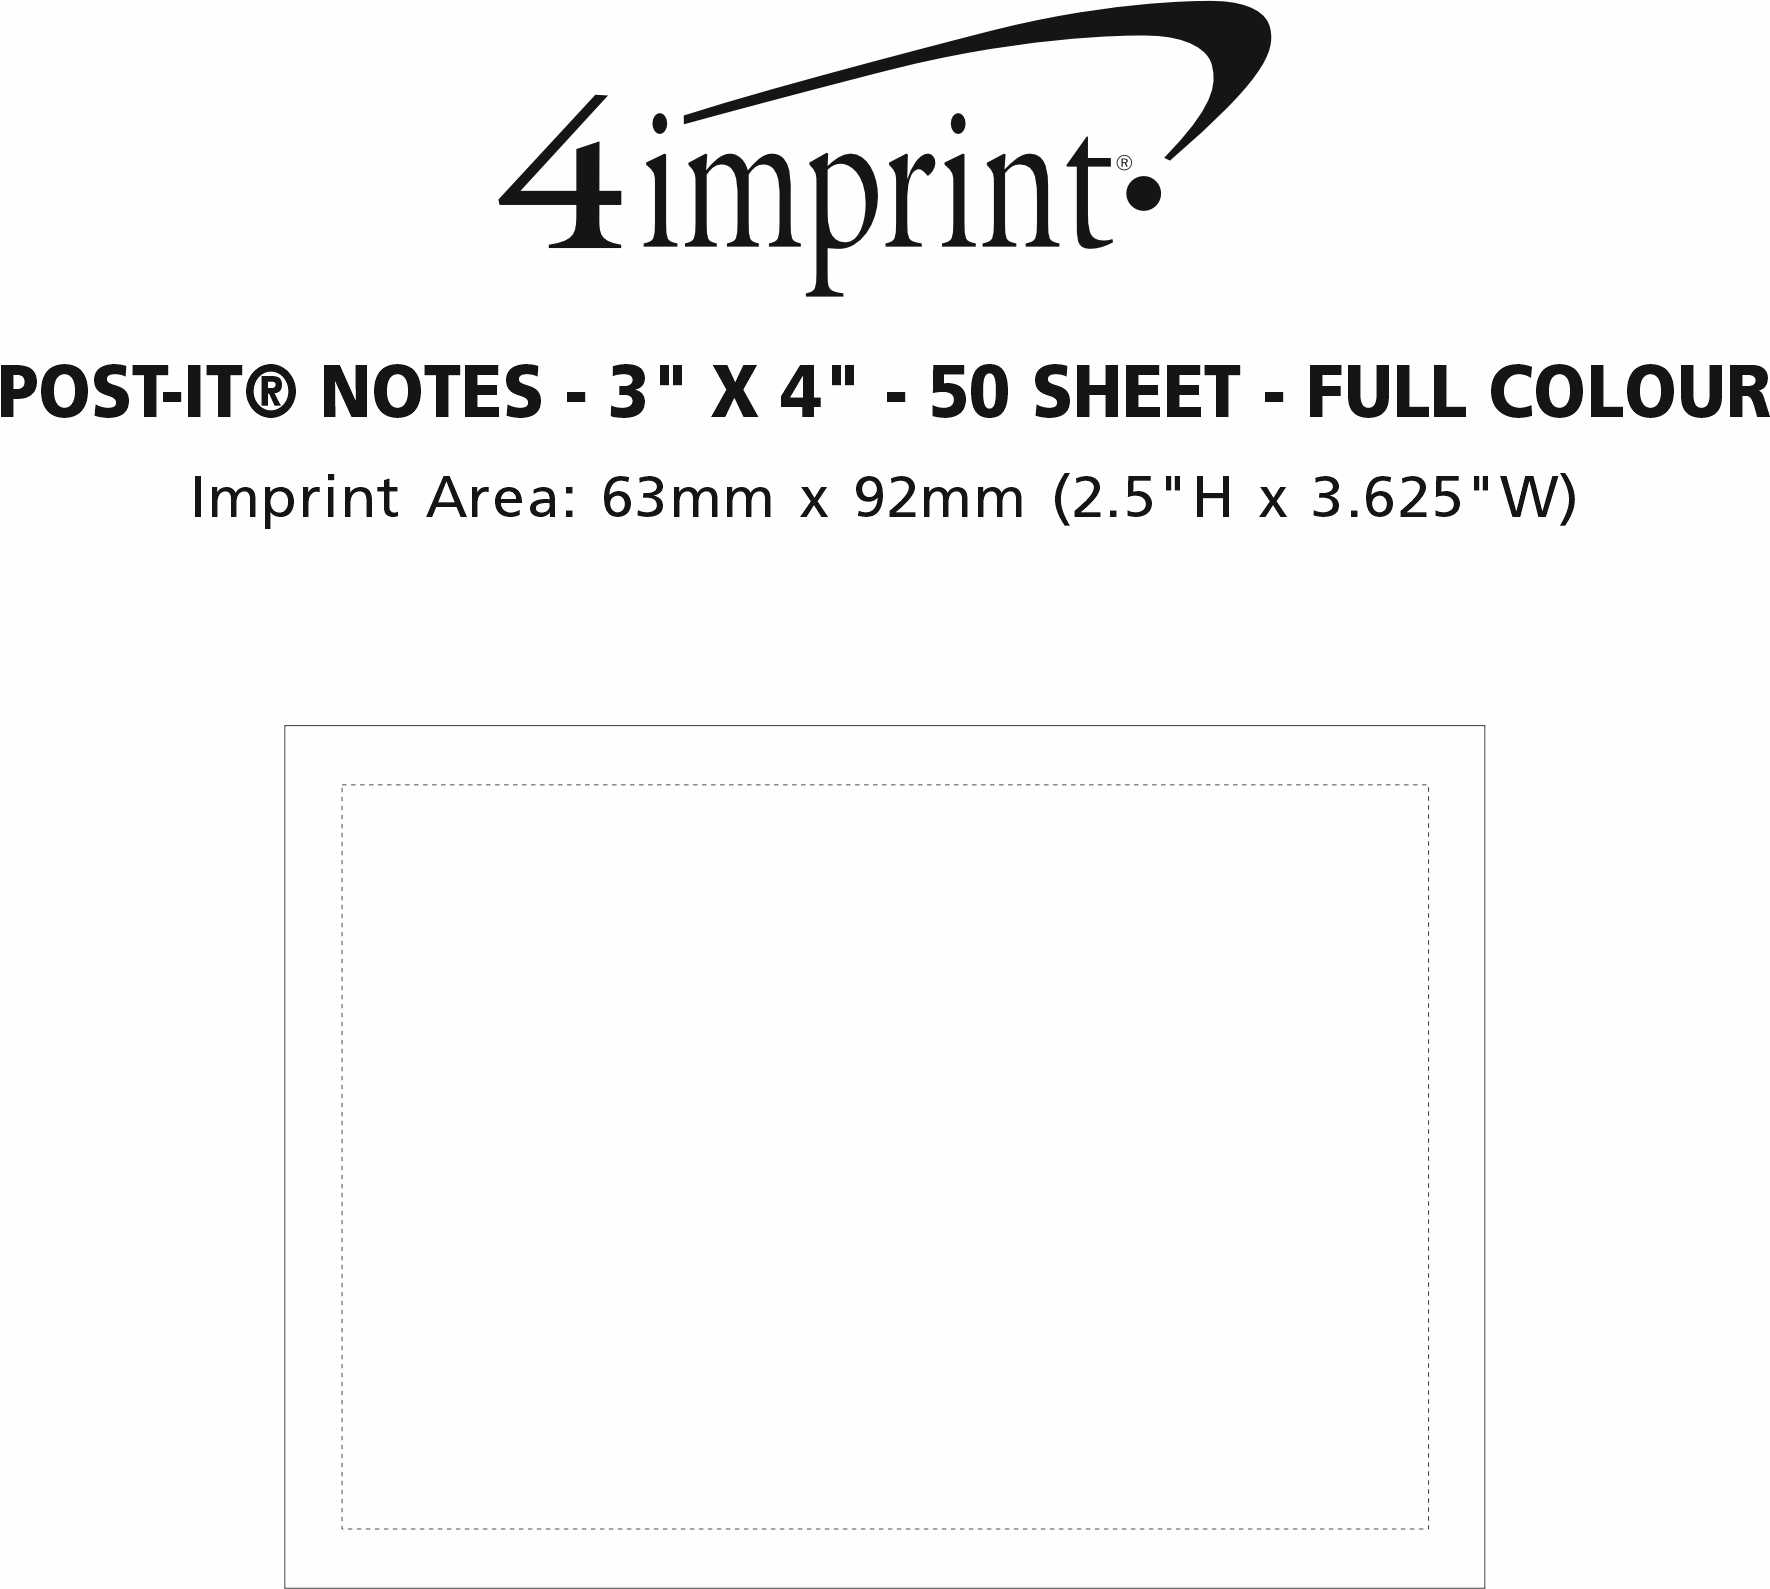 Imprint Area of Post-it® Notes - 3" x 4" - 50 Sheet - Full Colour